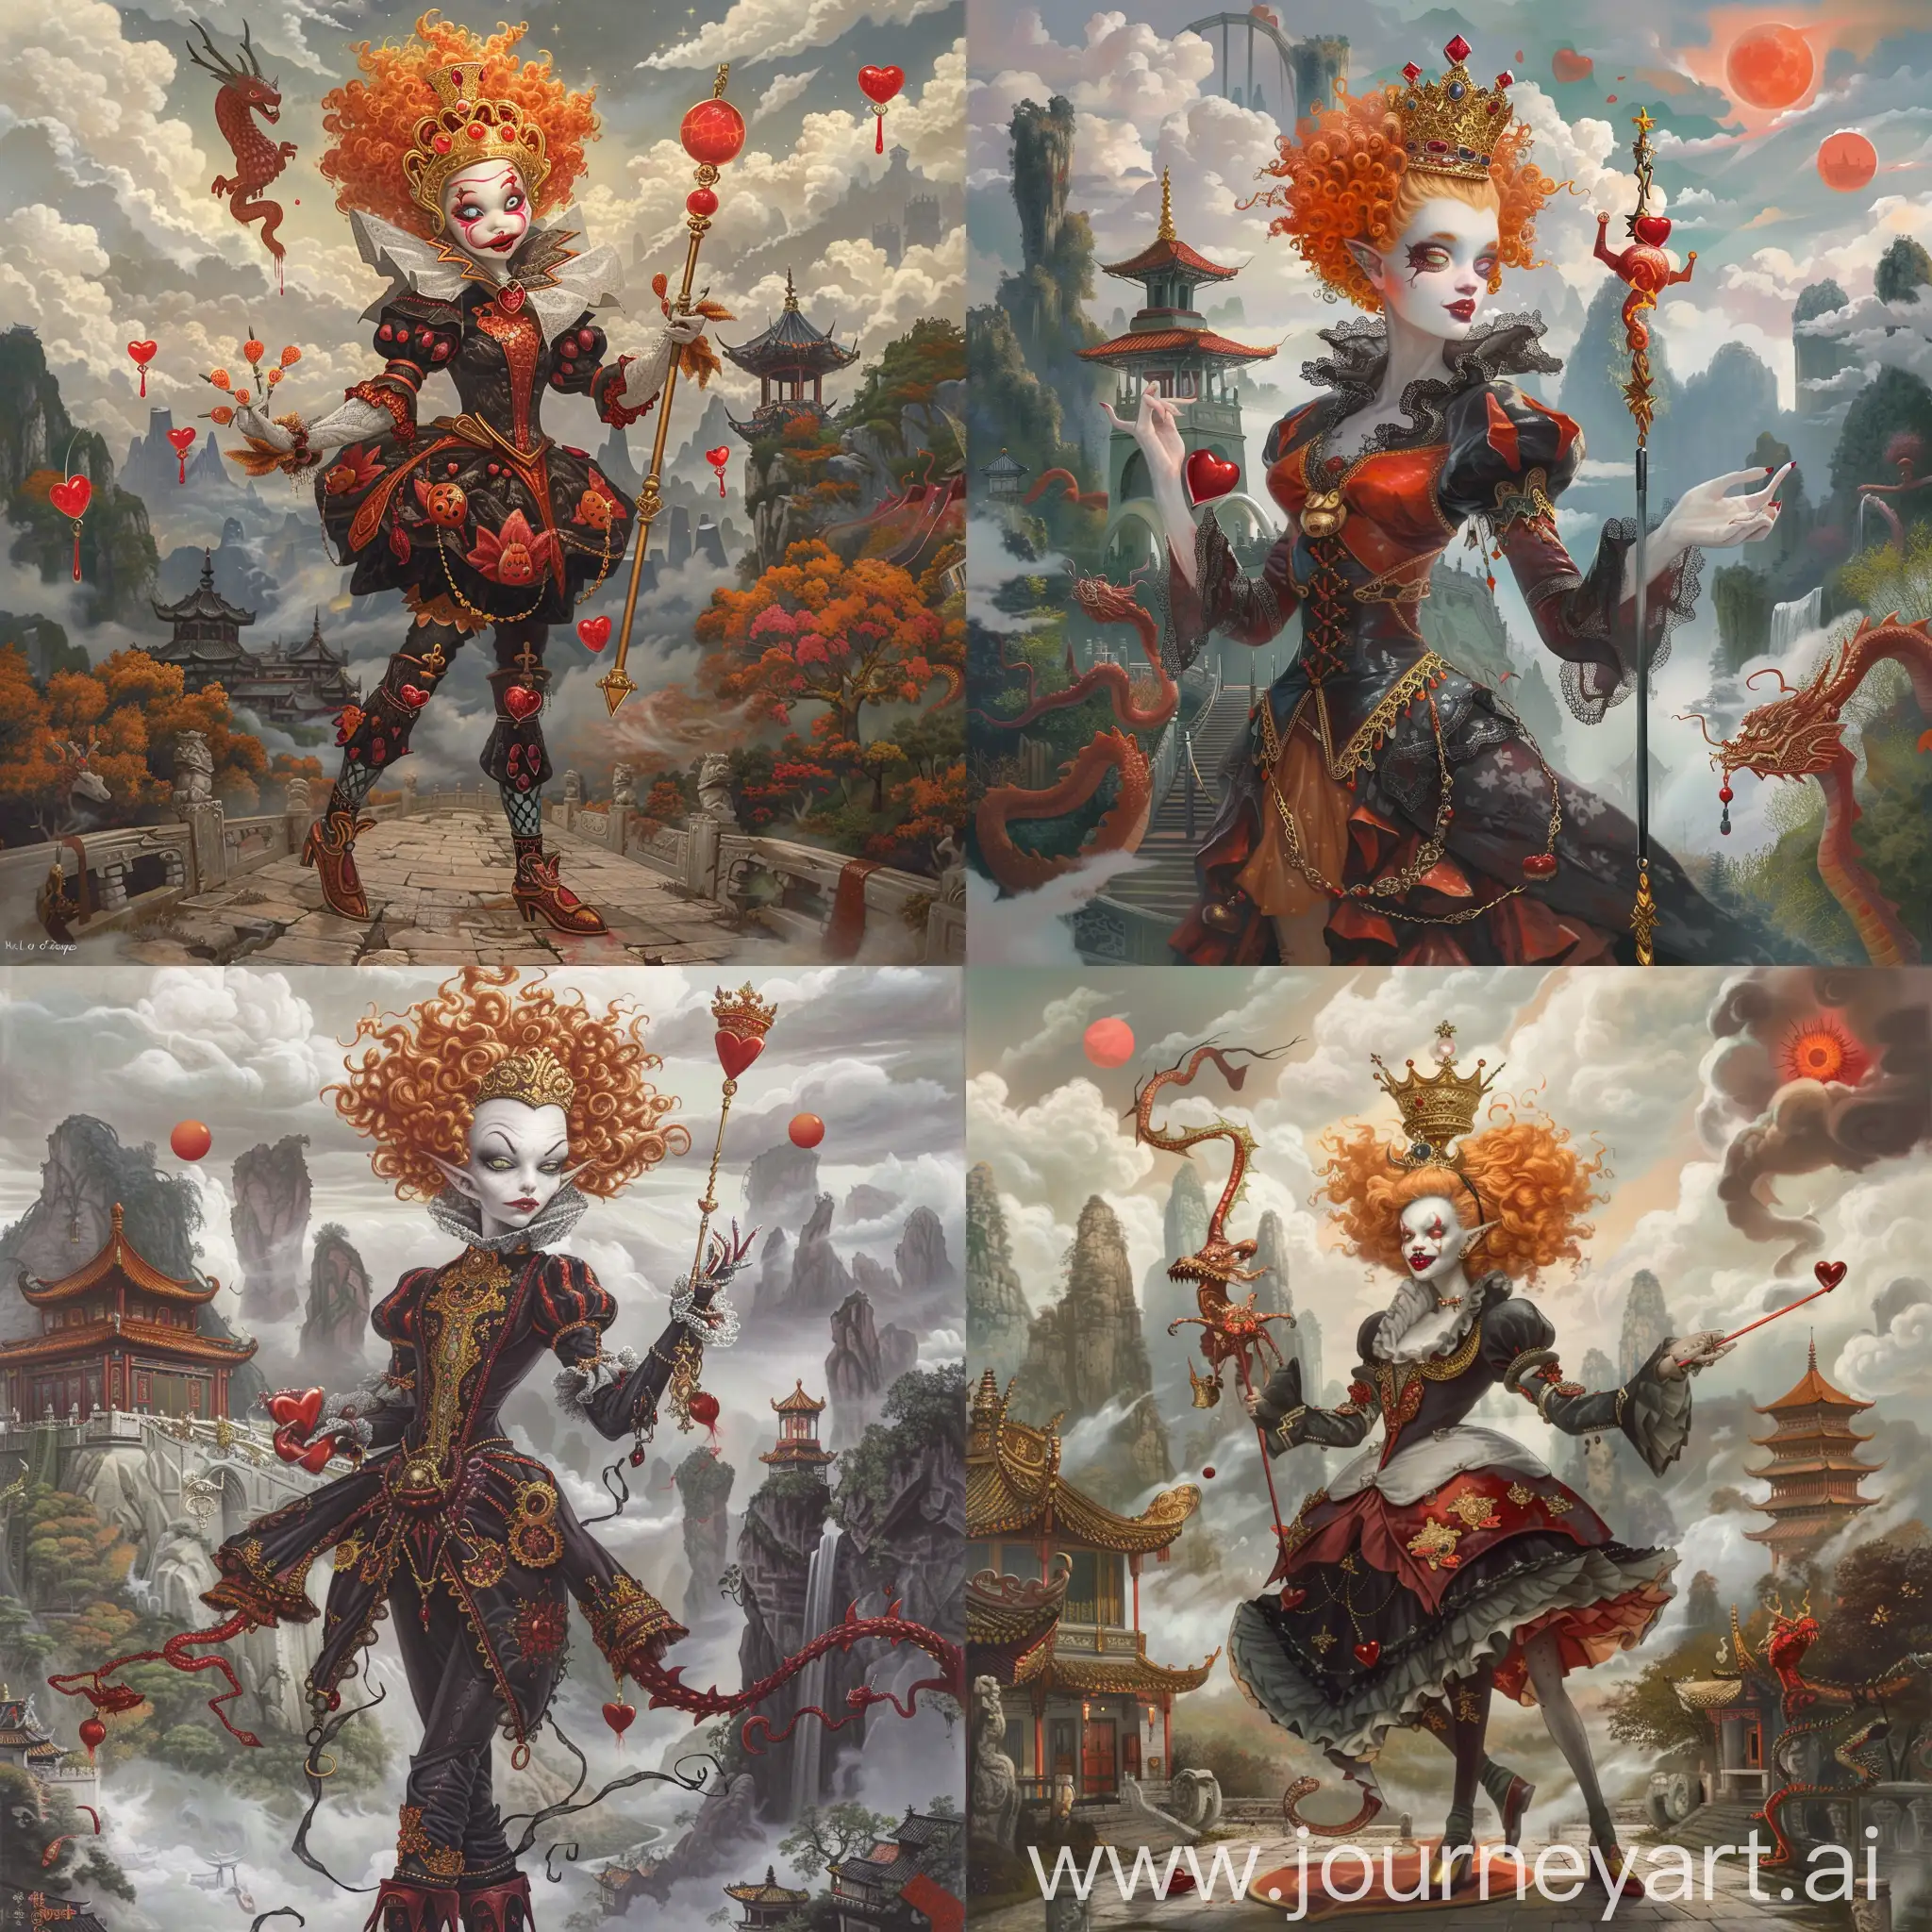 Historic painting style:

a Disney female British villain, Queen Of Hearts, from Alice cartoon, she has vampire style pale white skin,  she has orange curly hair and golden royal crown on her head, she wears dark red and black color Chinese style empress clothes and shoes, she holds a red heart royal wand in right hand,

Chinese Guilin mountains and temple as background,  evil iced dragons and three small red blood suns in cloudy sky.